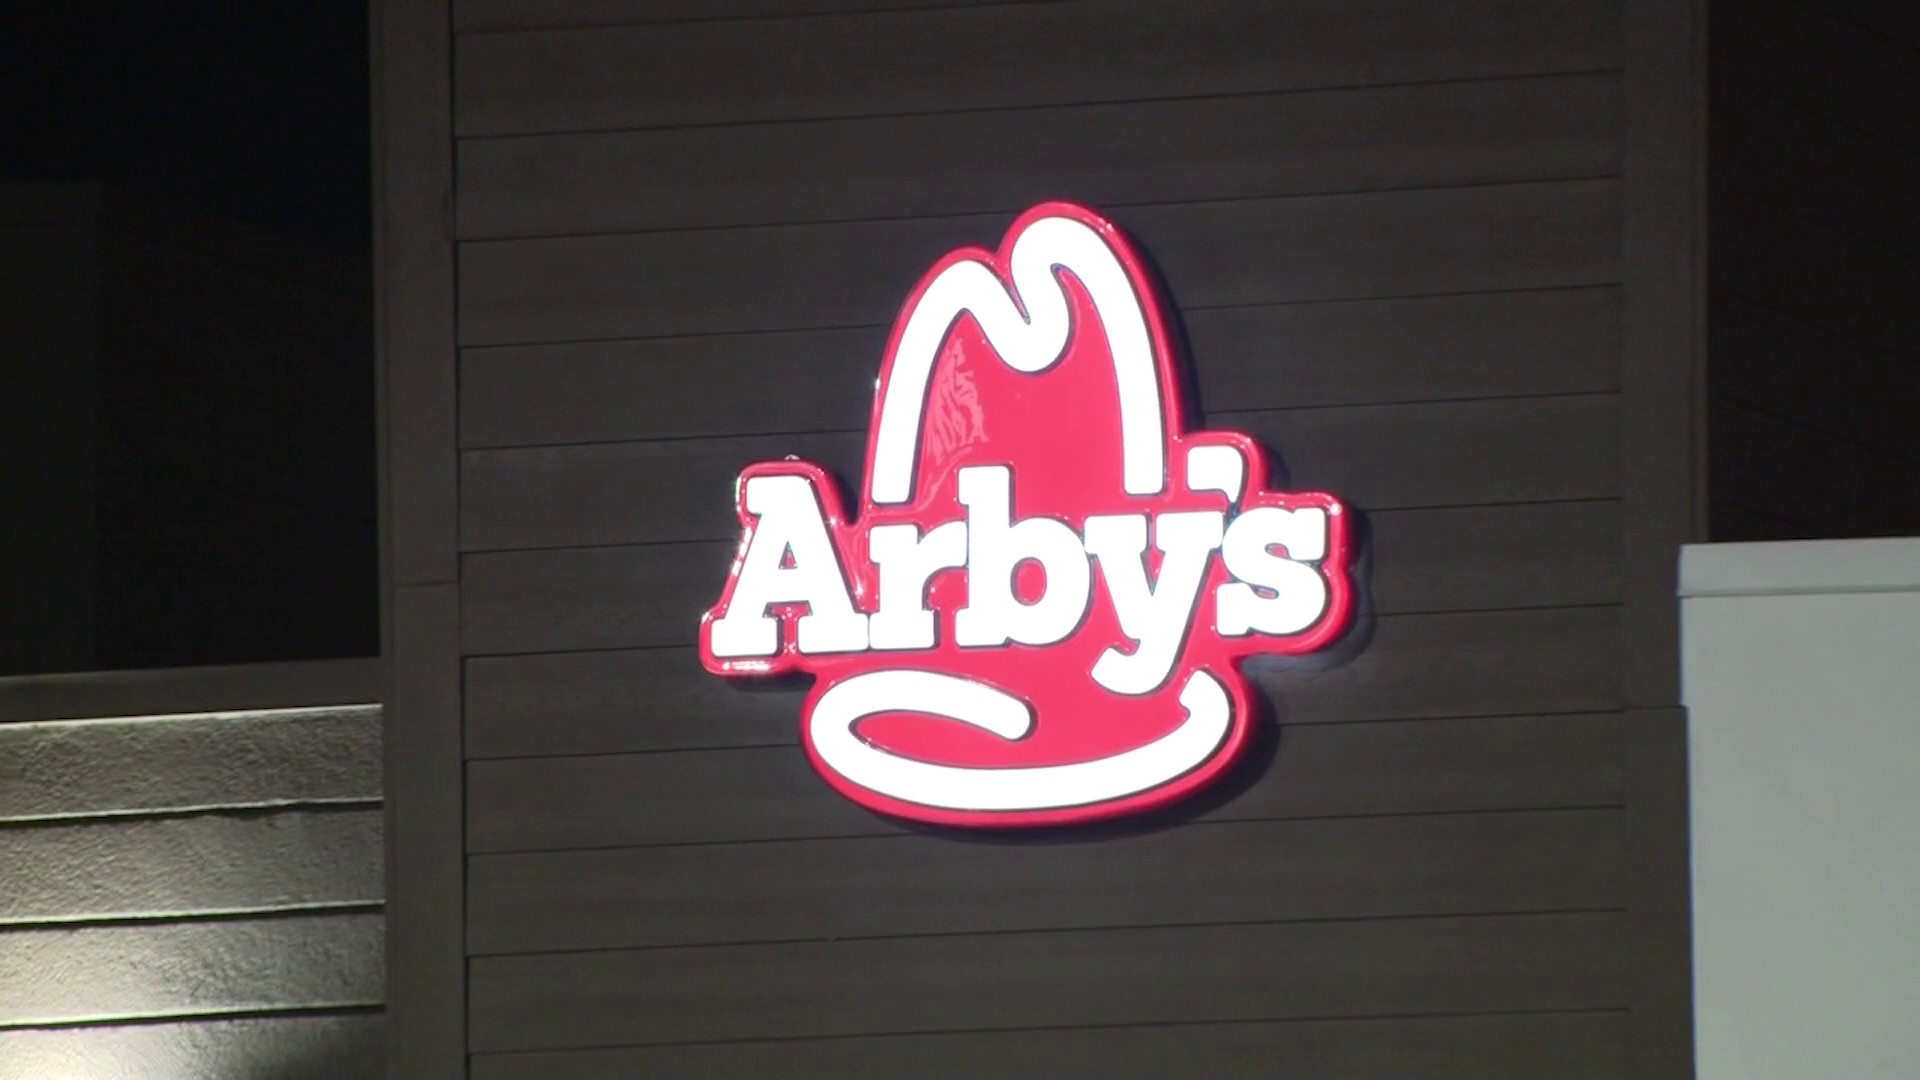 Houston Family Sues Arby’s After Mother Found Dead In The Walk-In Freezer